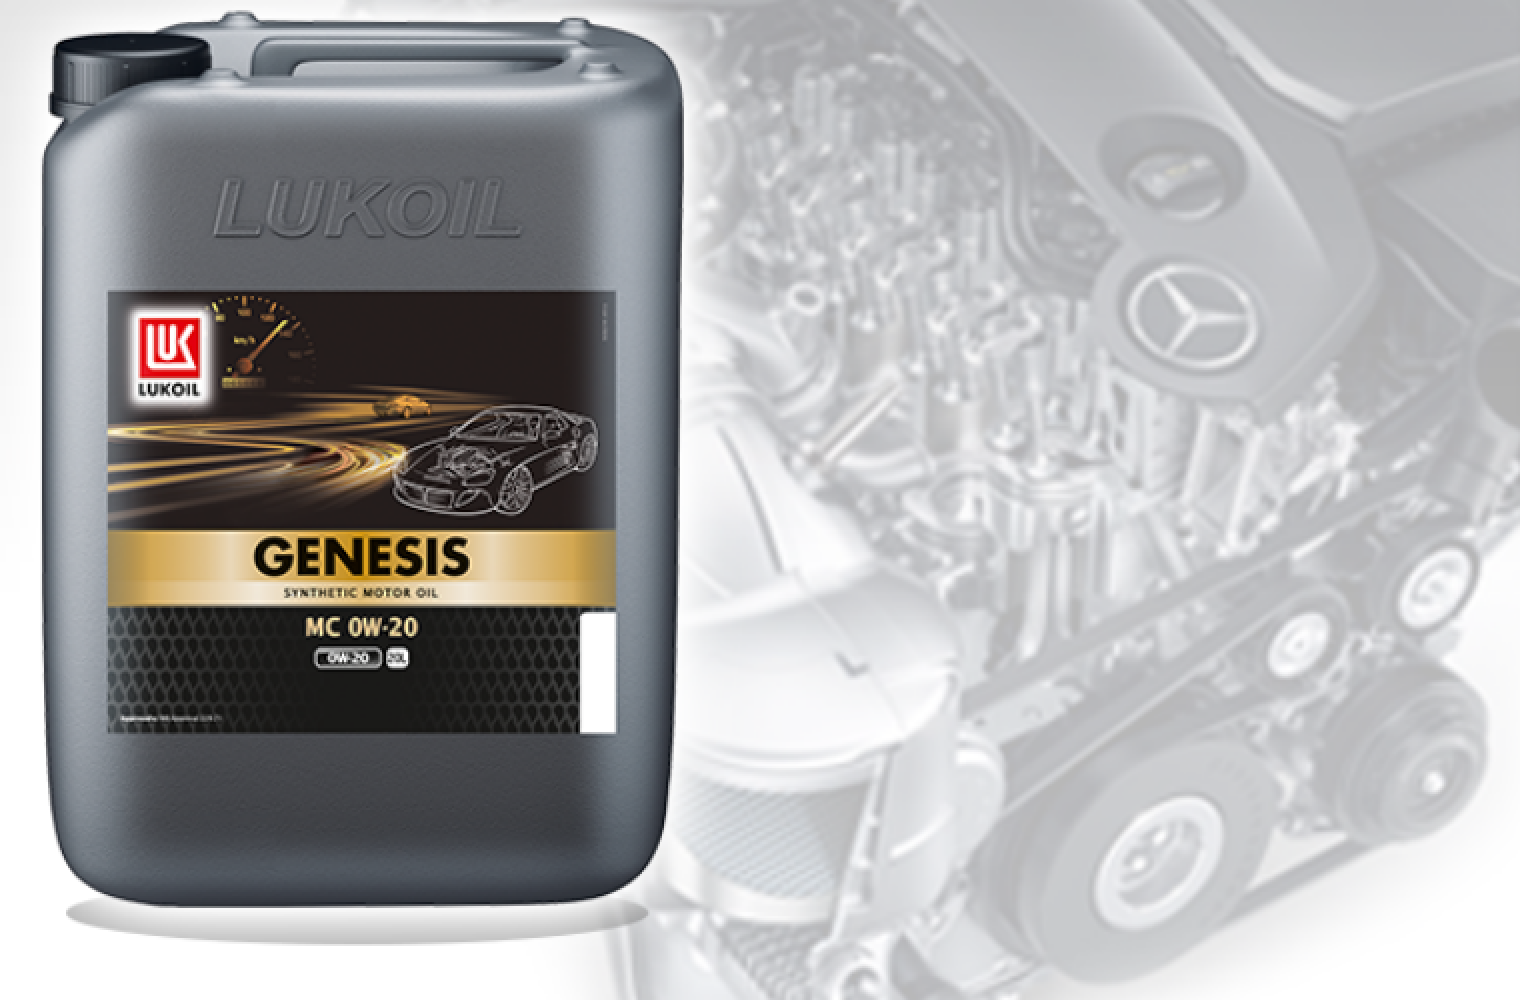 Lukoil Genesis 0w20. Генезис Лукойл 0-w20 Special. Моторное масло Лукойл 0w20. Genesis Special dx1 0w-20. Масло лукойл 0w